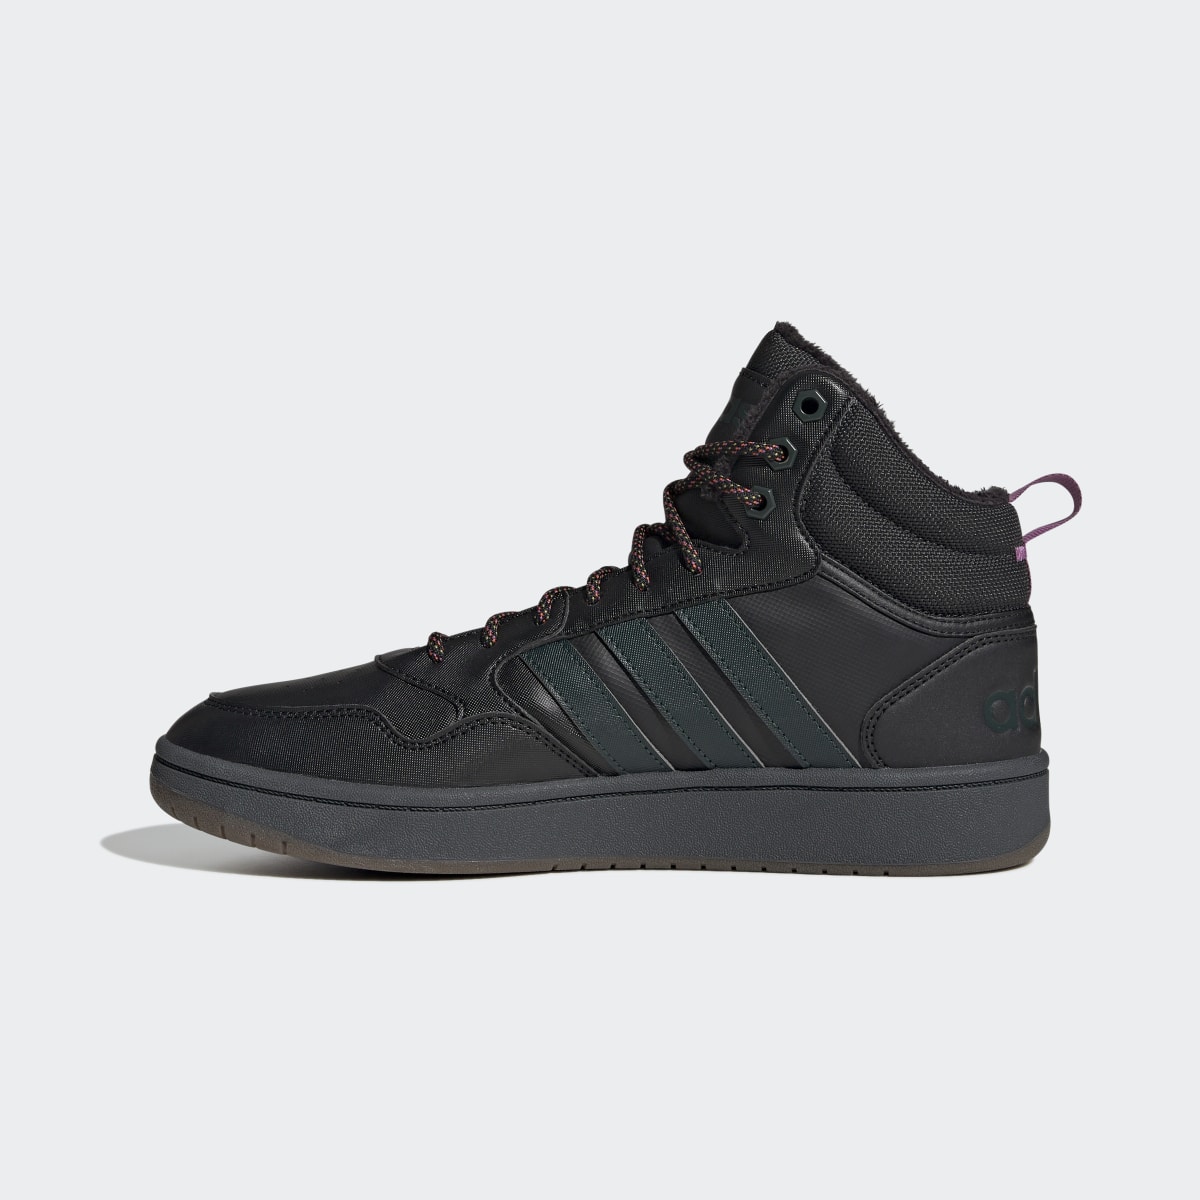 Adidas Hoops 3.0 Mid Lifestyle Basketball Classic Fur Lining Winterized Shoes. 7